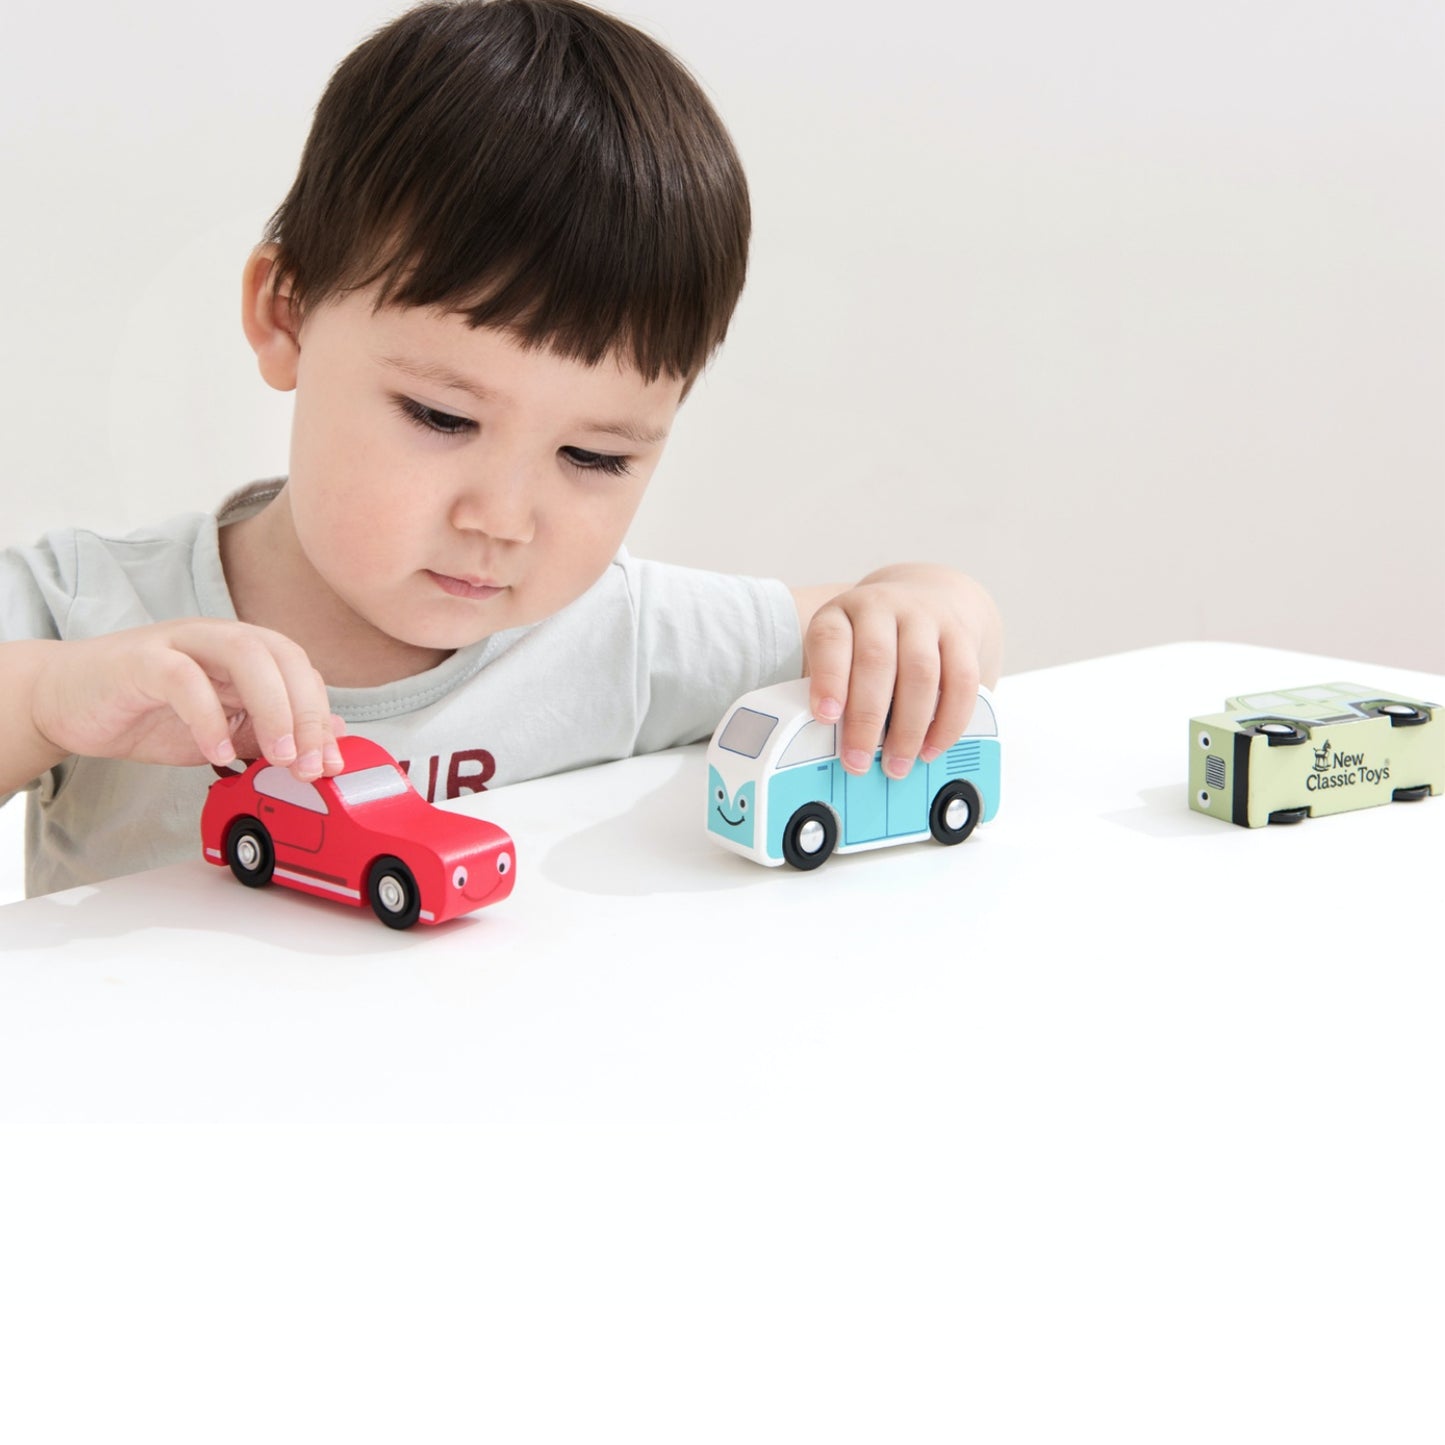 New Classic Toys Wooden Shape Sorter Truck | Baby & Toddler Activity Wooden Toy | Lifestyle - Boy Playing with Two Cars on Table | BeoVERDE.ie